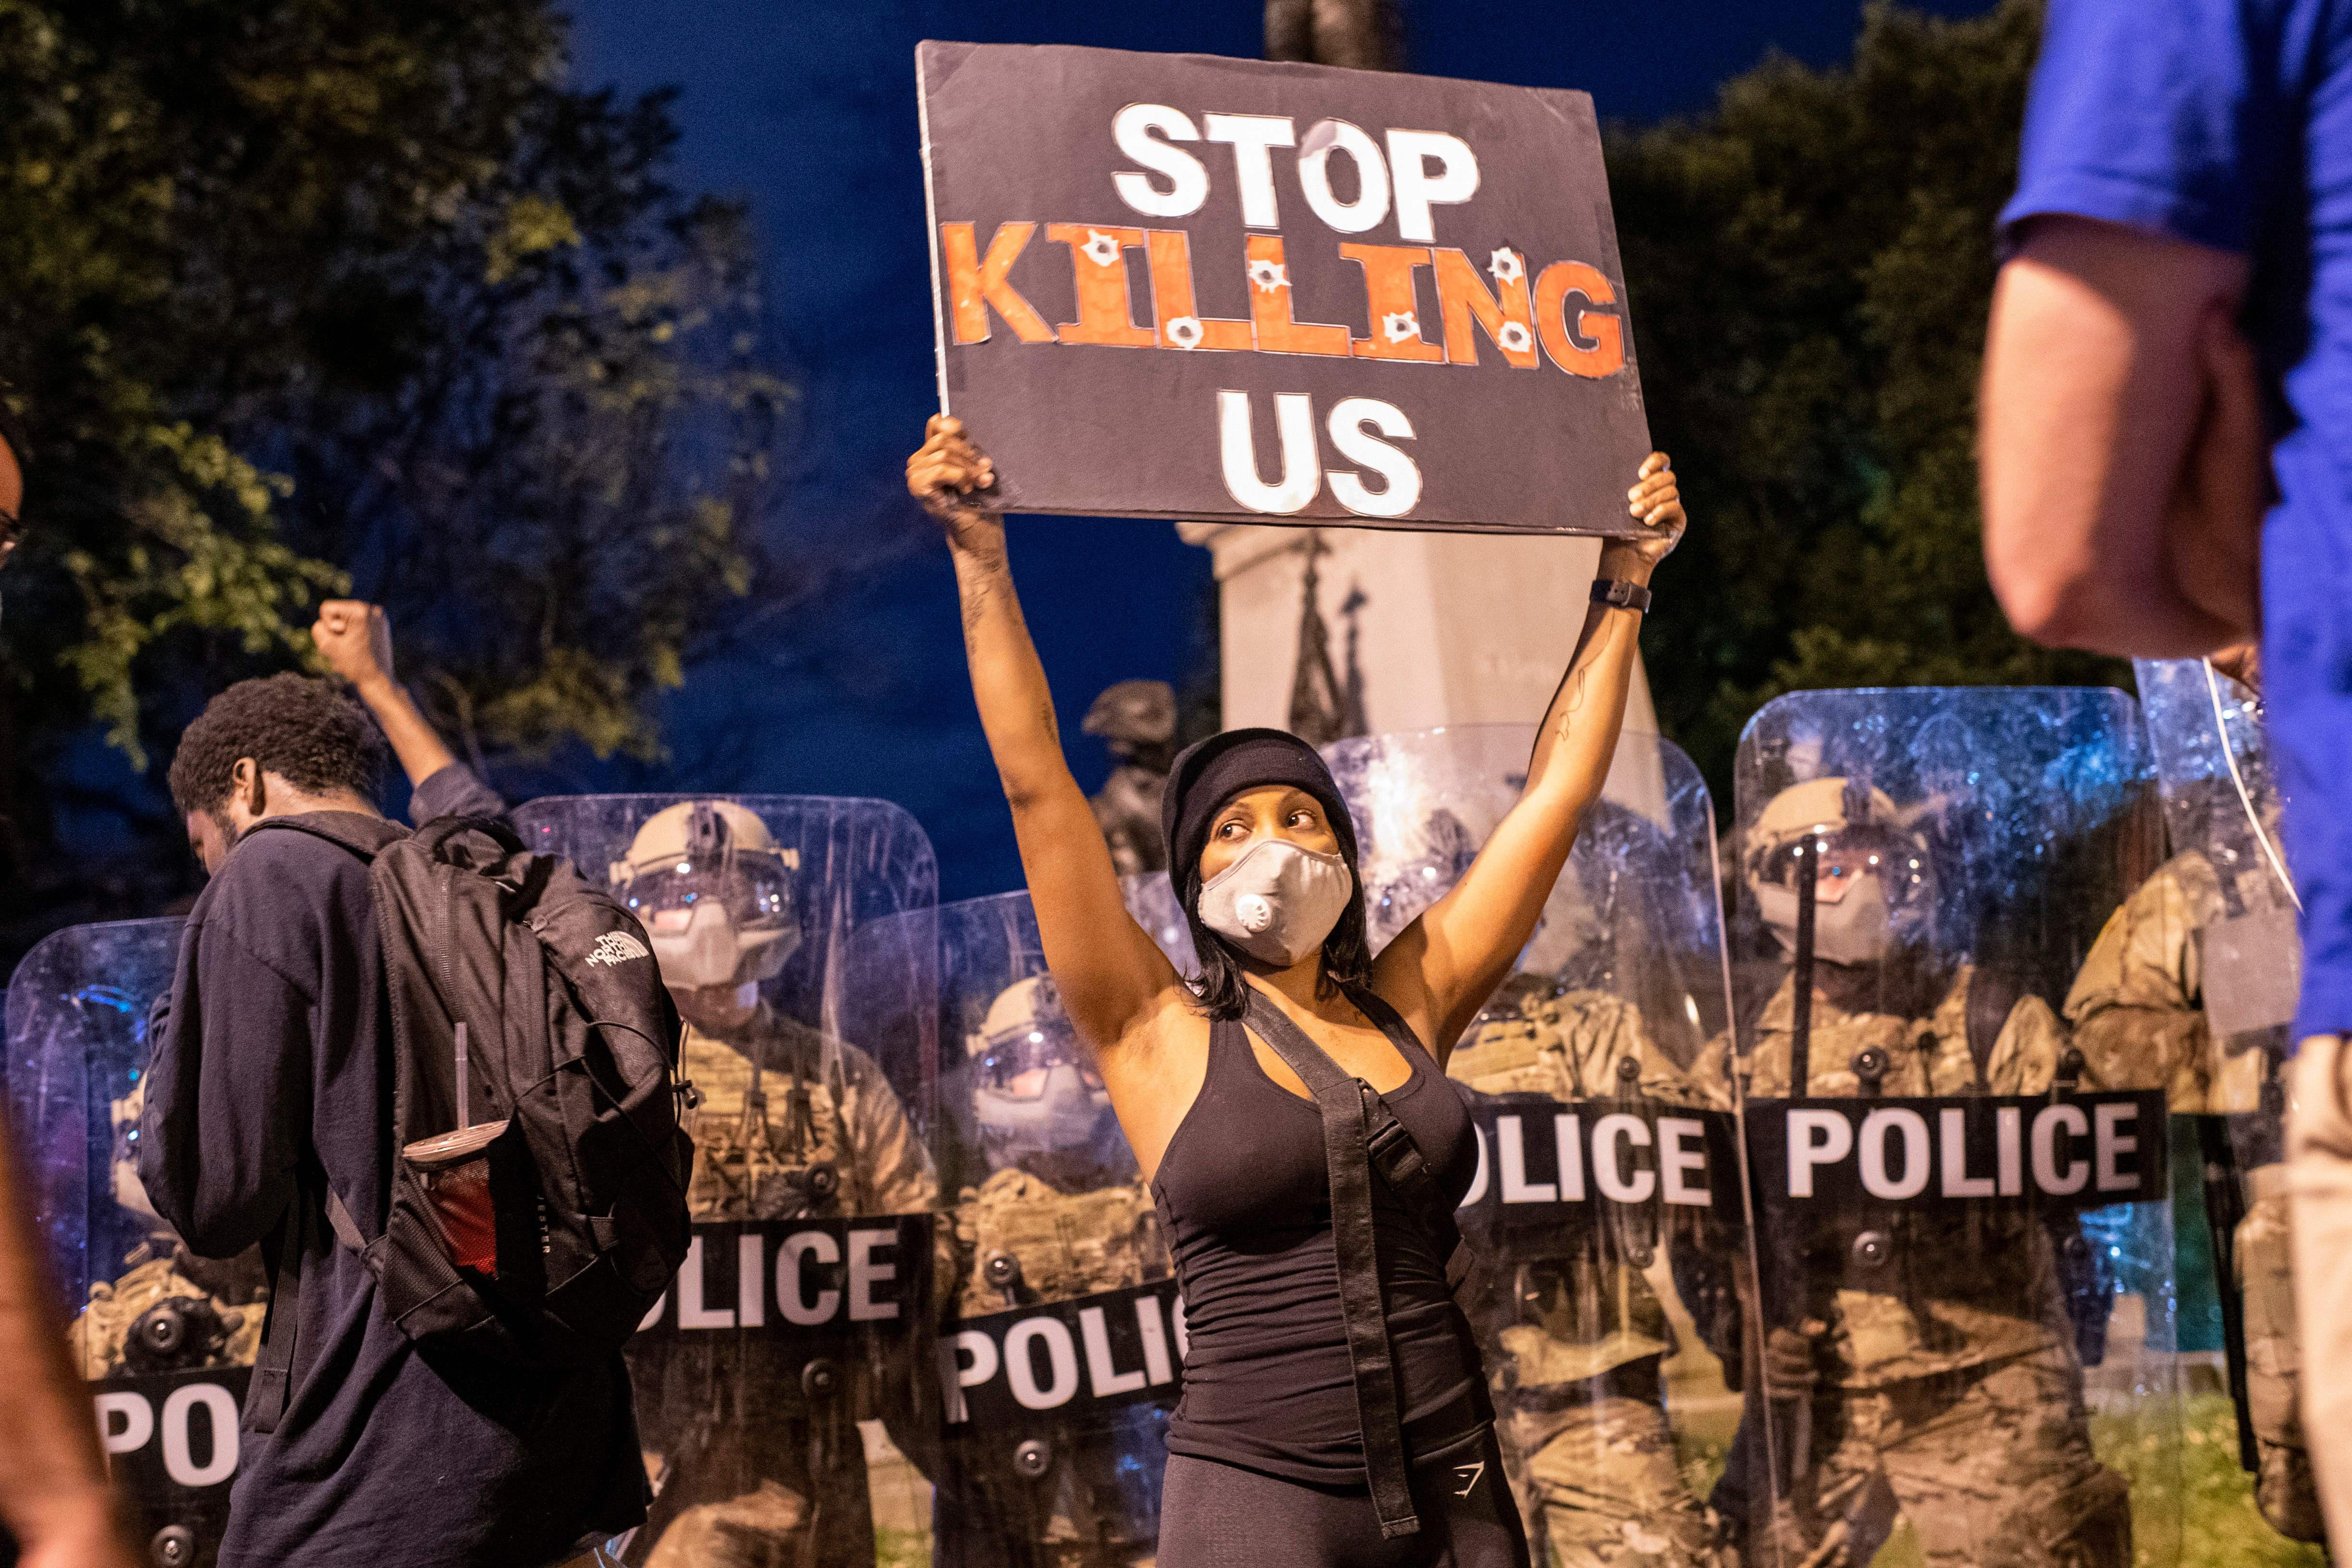 A demonstrator holds a sign reading "Stop Killing Us" in front of a police line outside of the White House on May 30, 2020 in Washington, D.C.